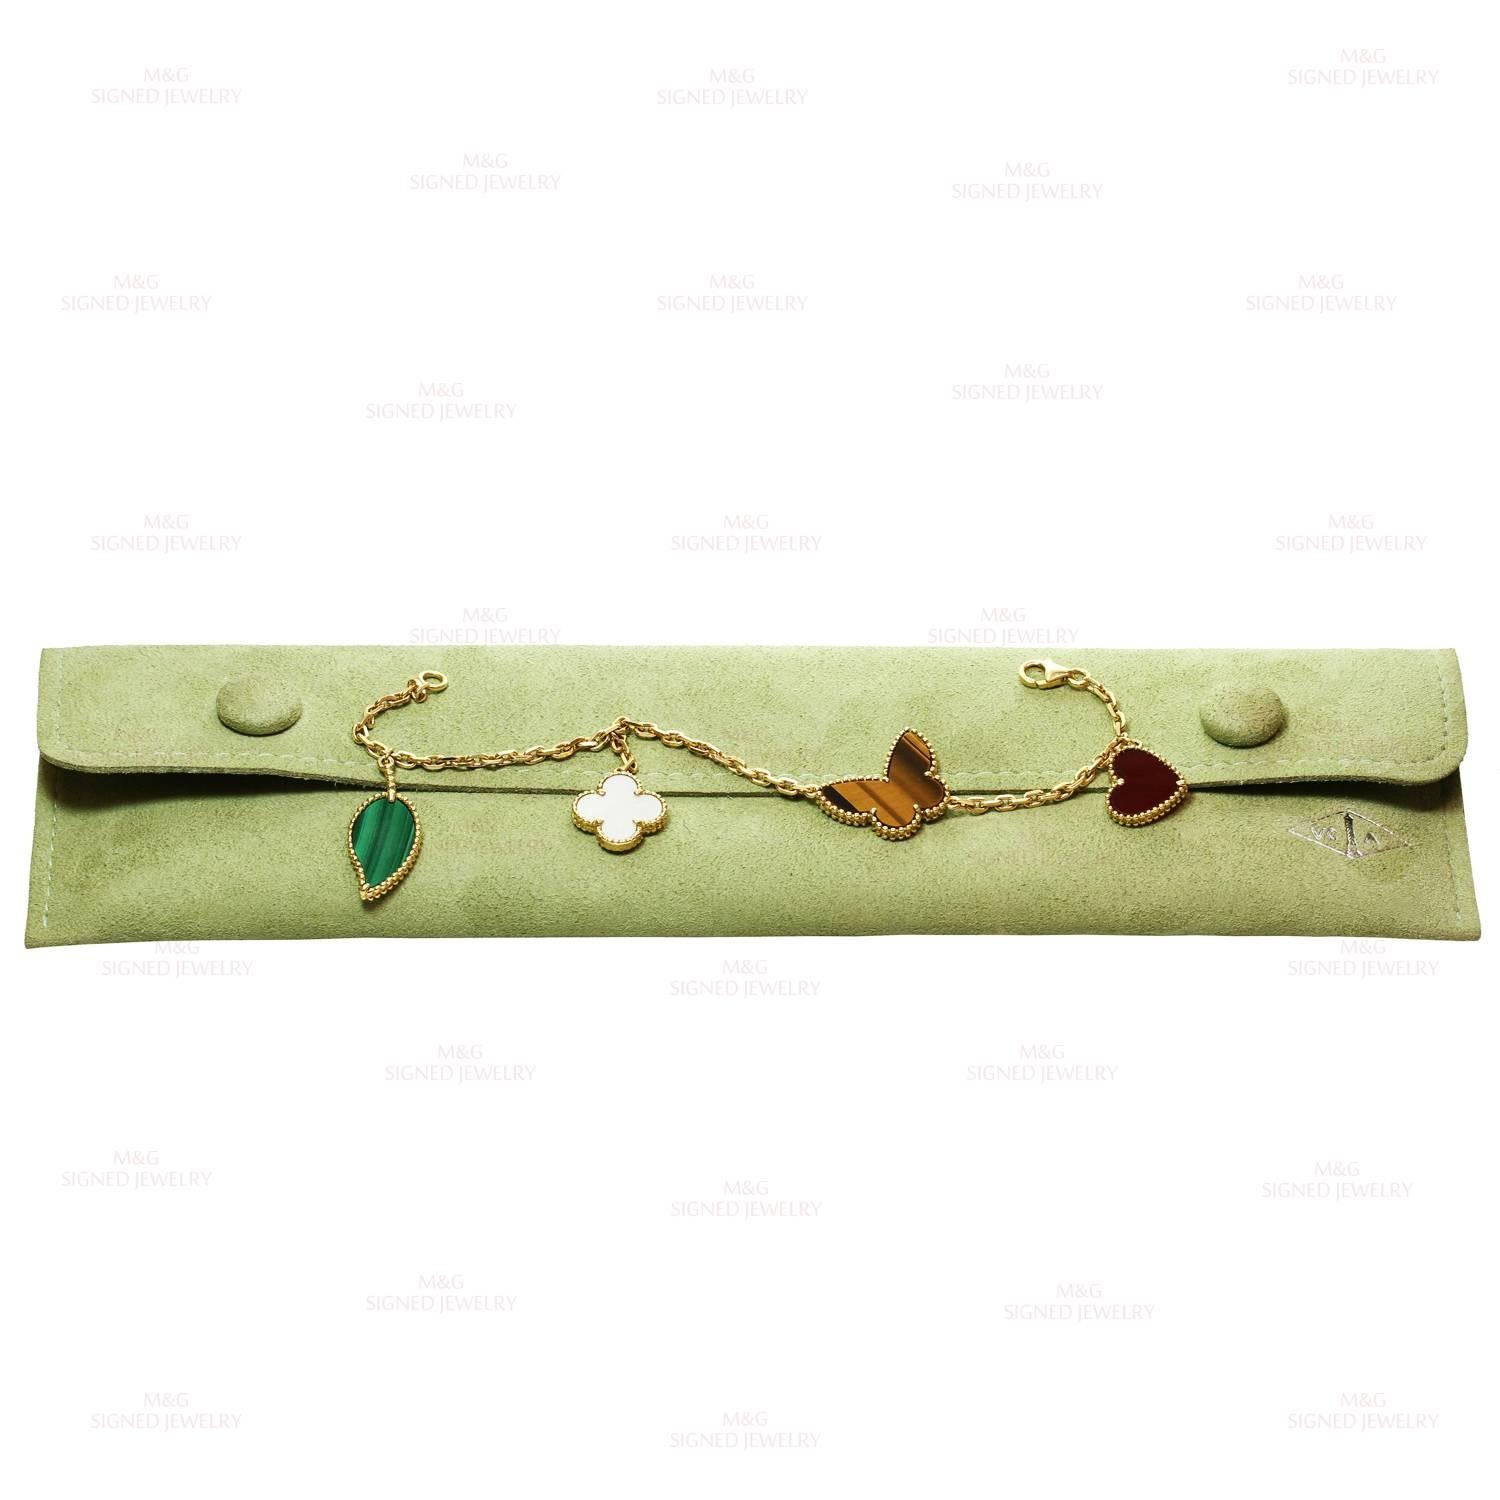 This fabulous bracelet from the iconic Alhambra collection by Van Cleef & Arpels is crafted in 18k yellow gold and features 4 charms - a carnelian heart, a tiger's eye butterfly, a green malachite leaf and a mother-of-pearl lucky clover. France